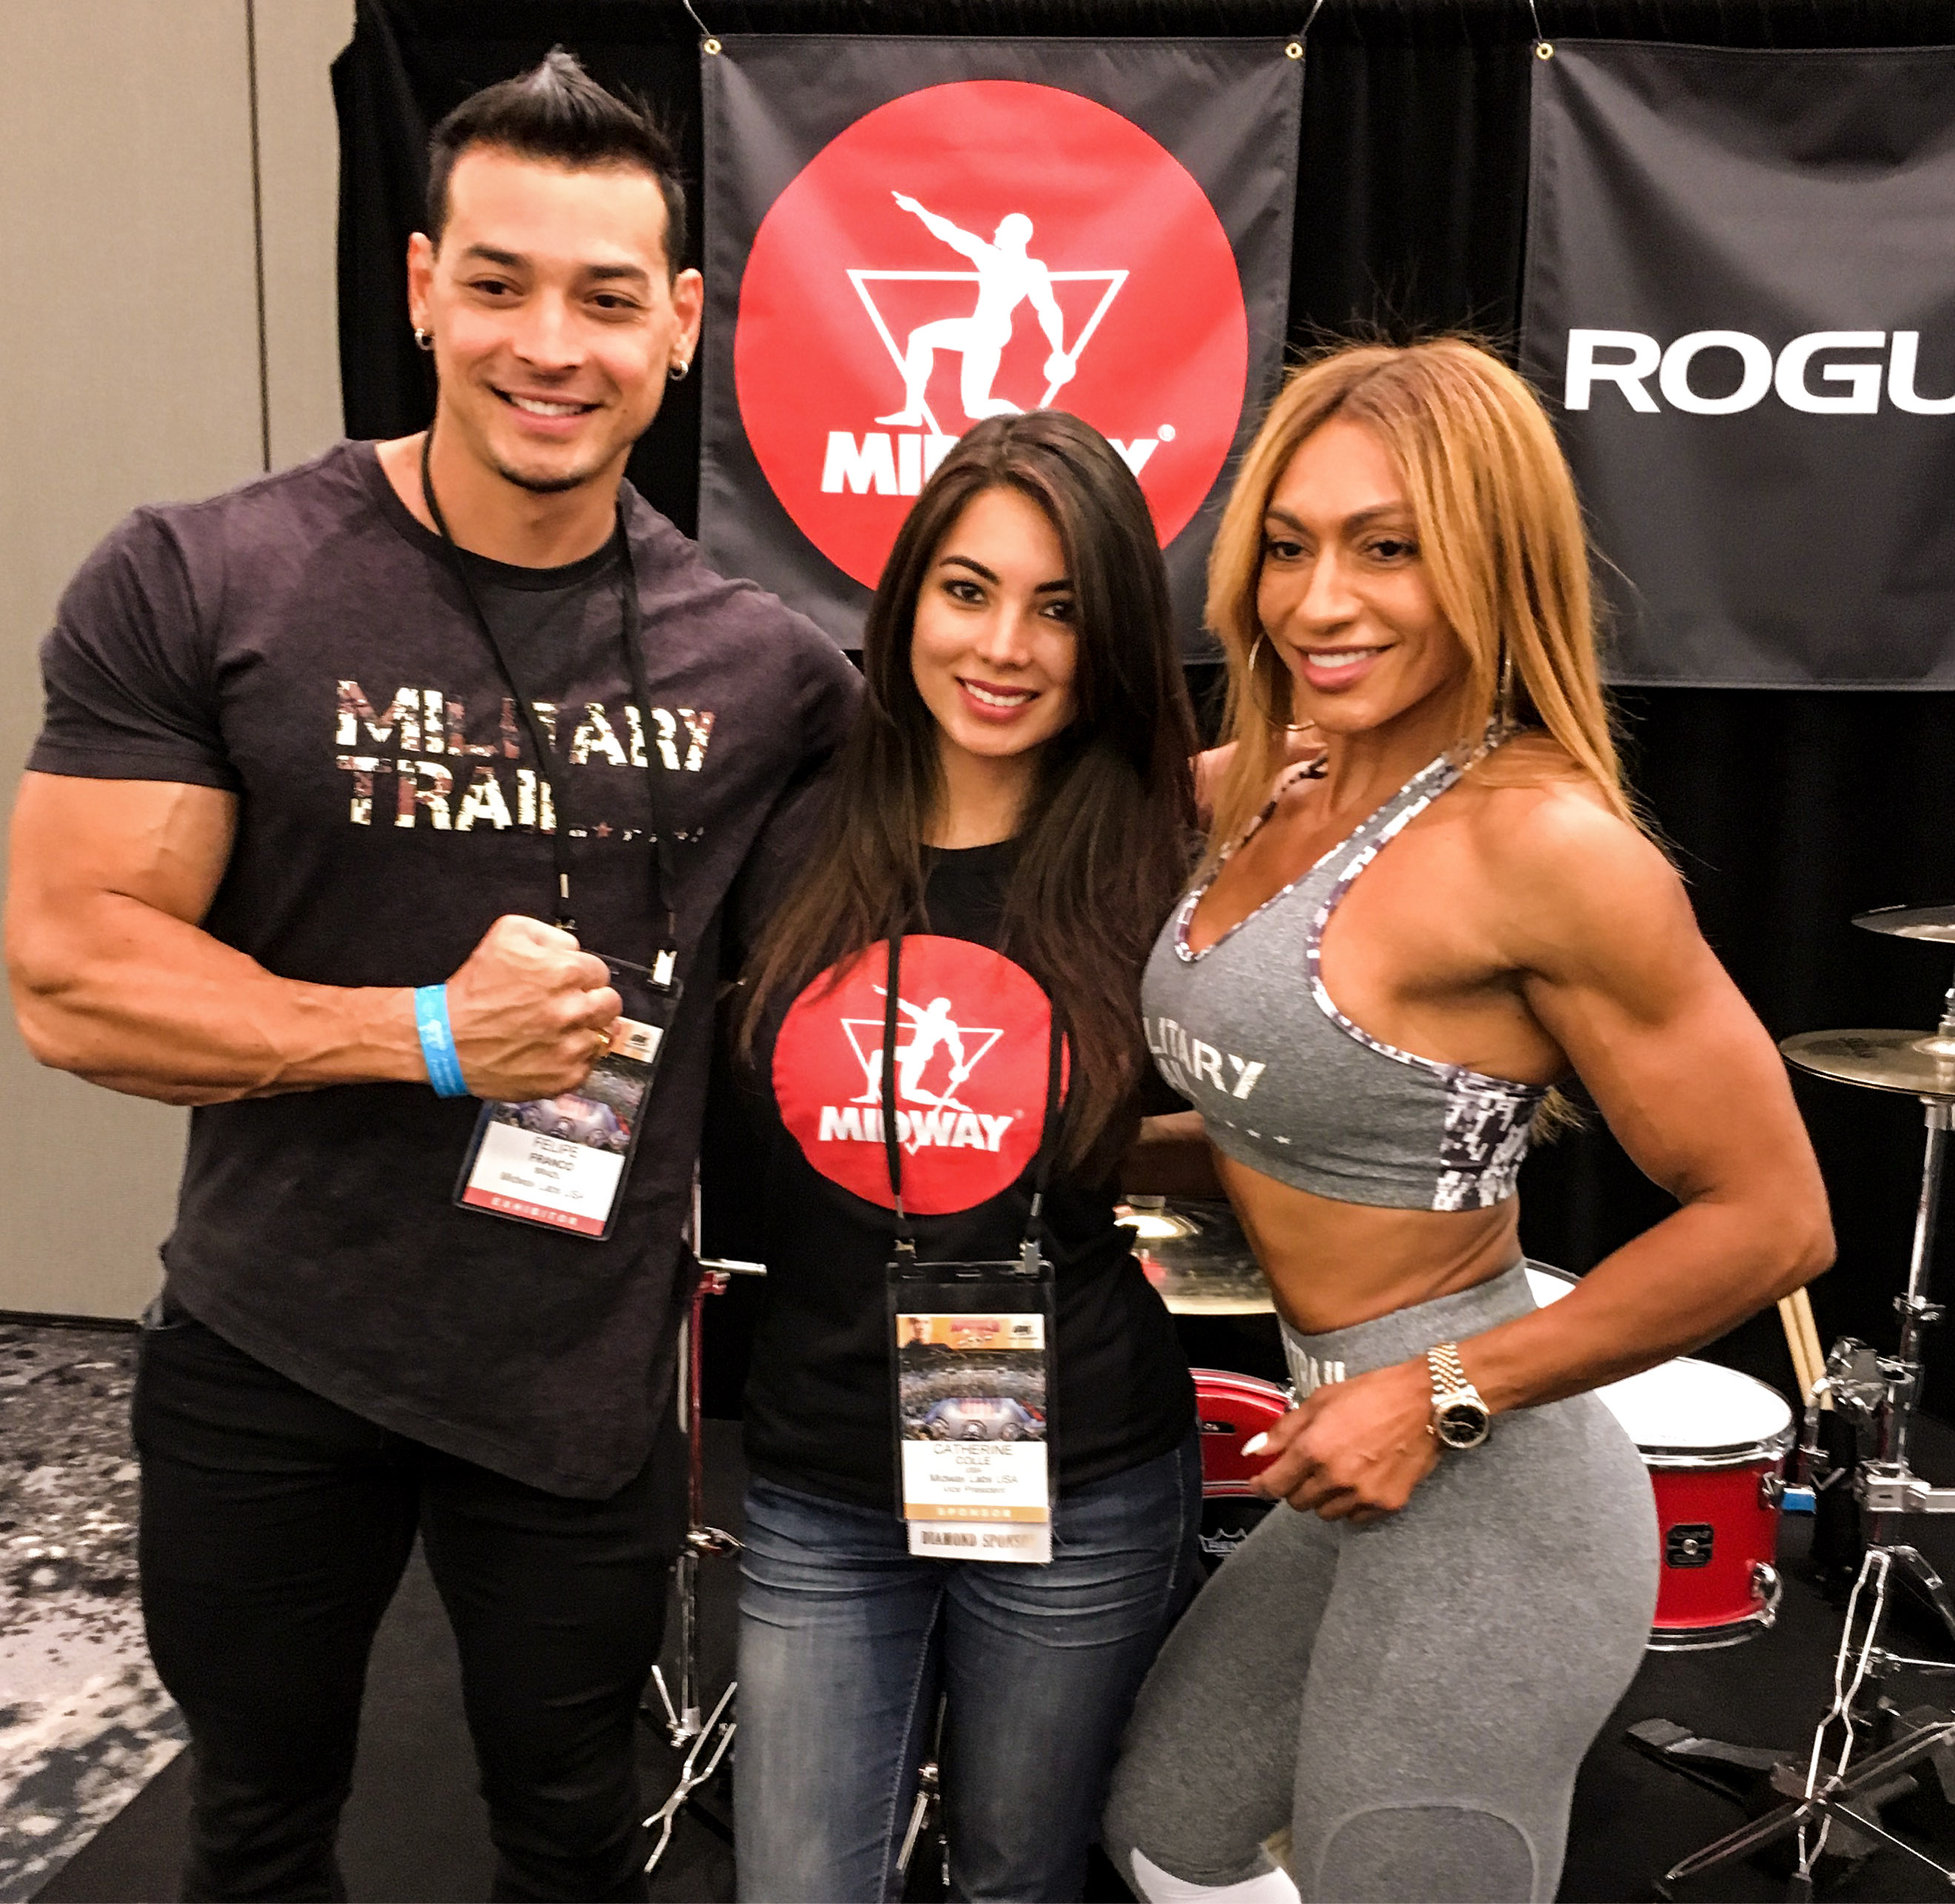 Felipe Franco, Midway Labs VP Catherine Colle and<br /> Karina Nascimento saying hello to the cameras.